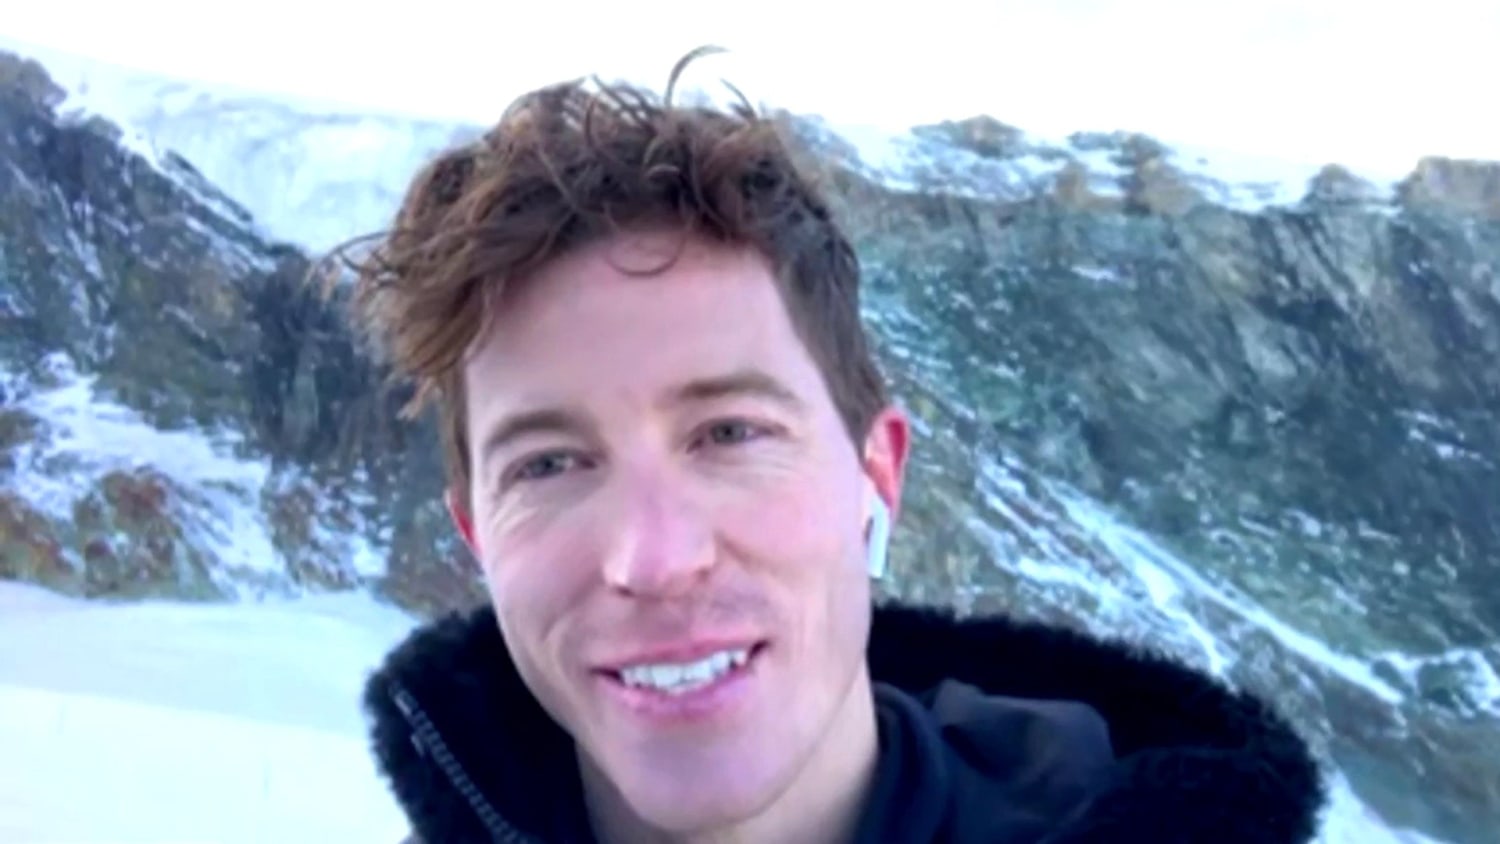 Shaun White says Beijing Winter Olympics in 2022 will likely be